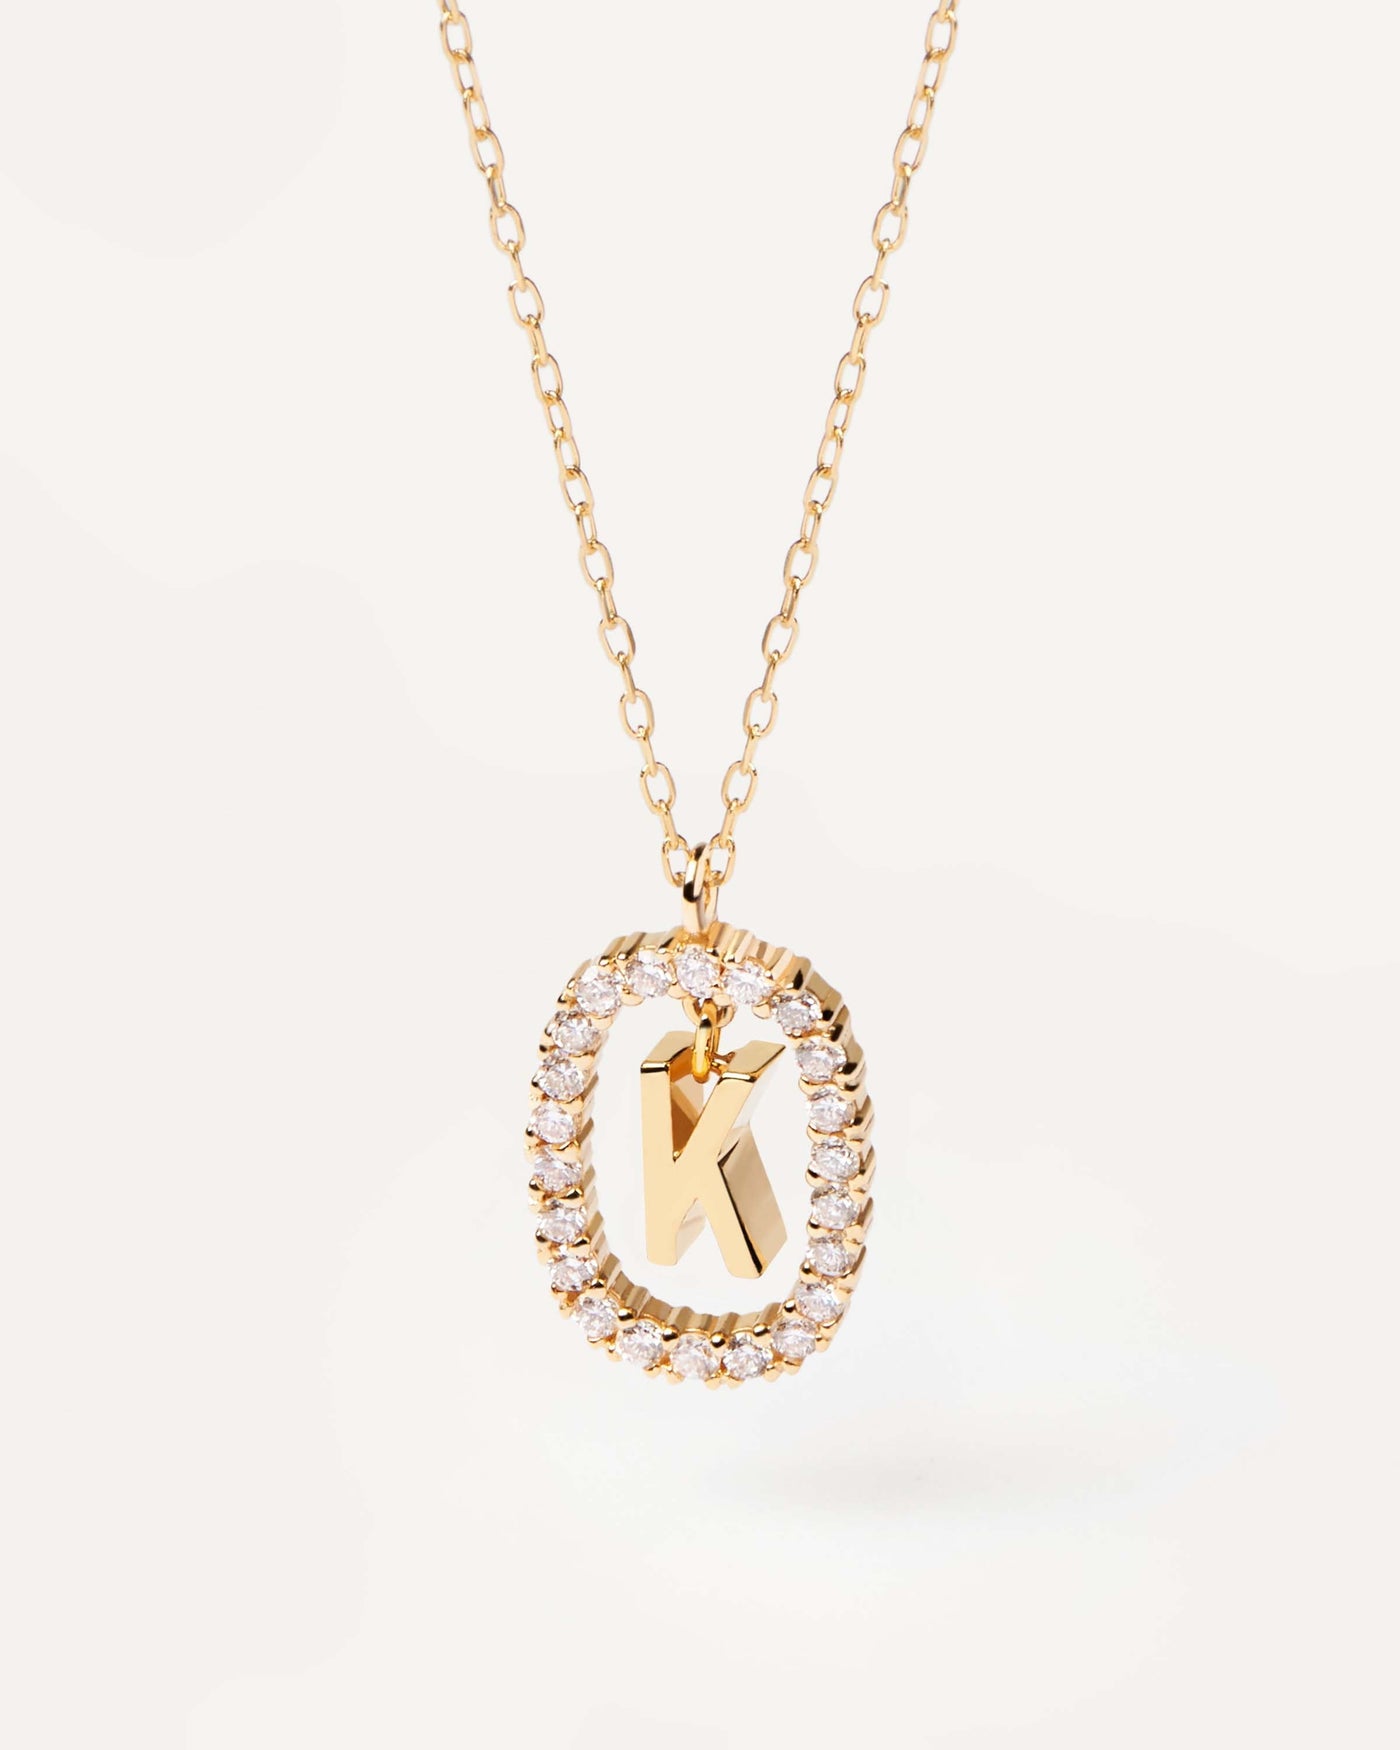 2024 Selection | Diamonds and Gold Letter K Necklace. Initial K necklace in solid yellow gold, circled by 0.33 carats lab-grown diamonds. Get the latest arrival from PDPAOLA. Place your order safely and get this Best Seller. Free Shipping.